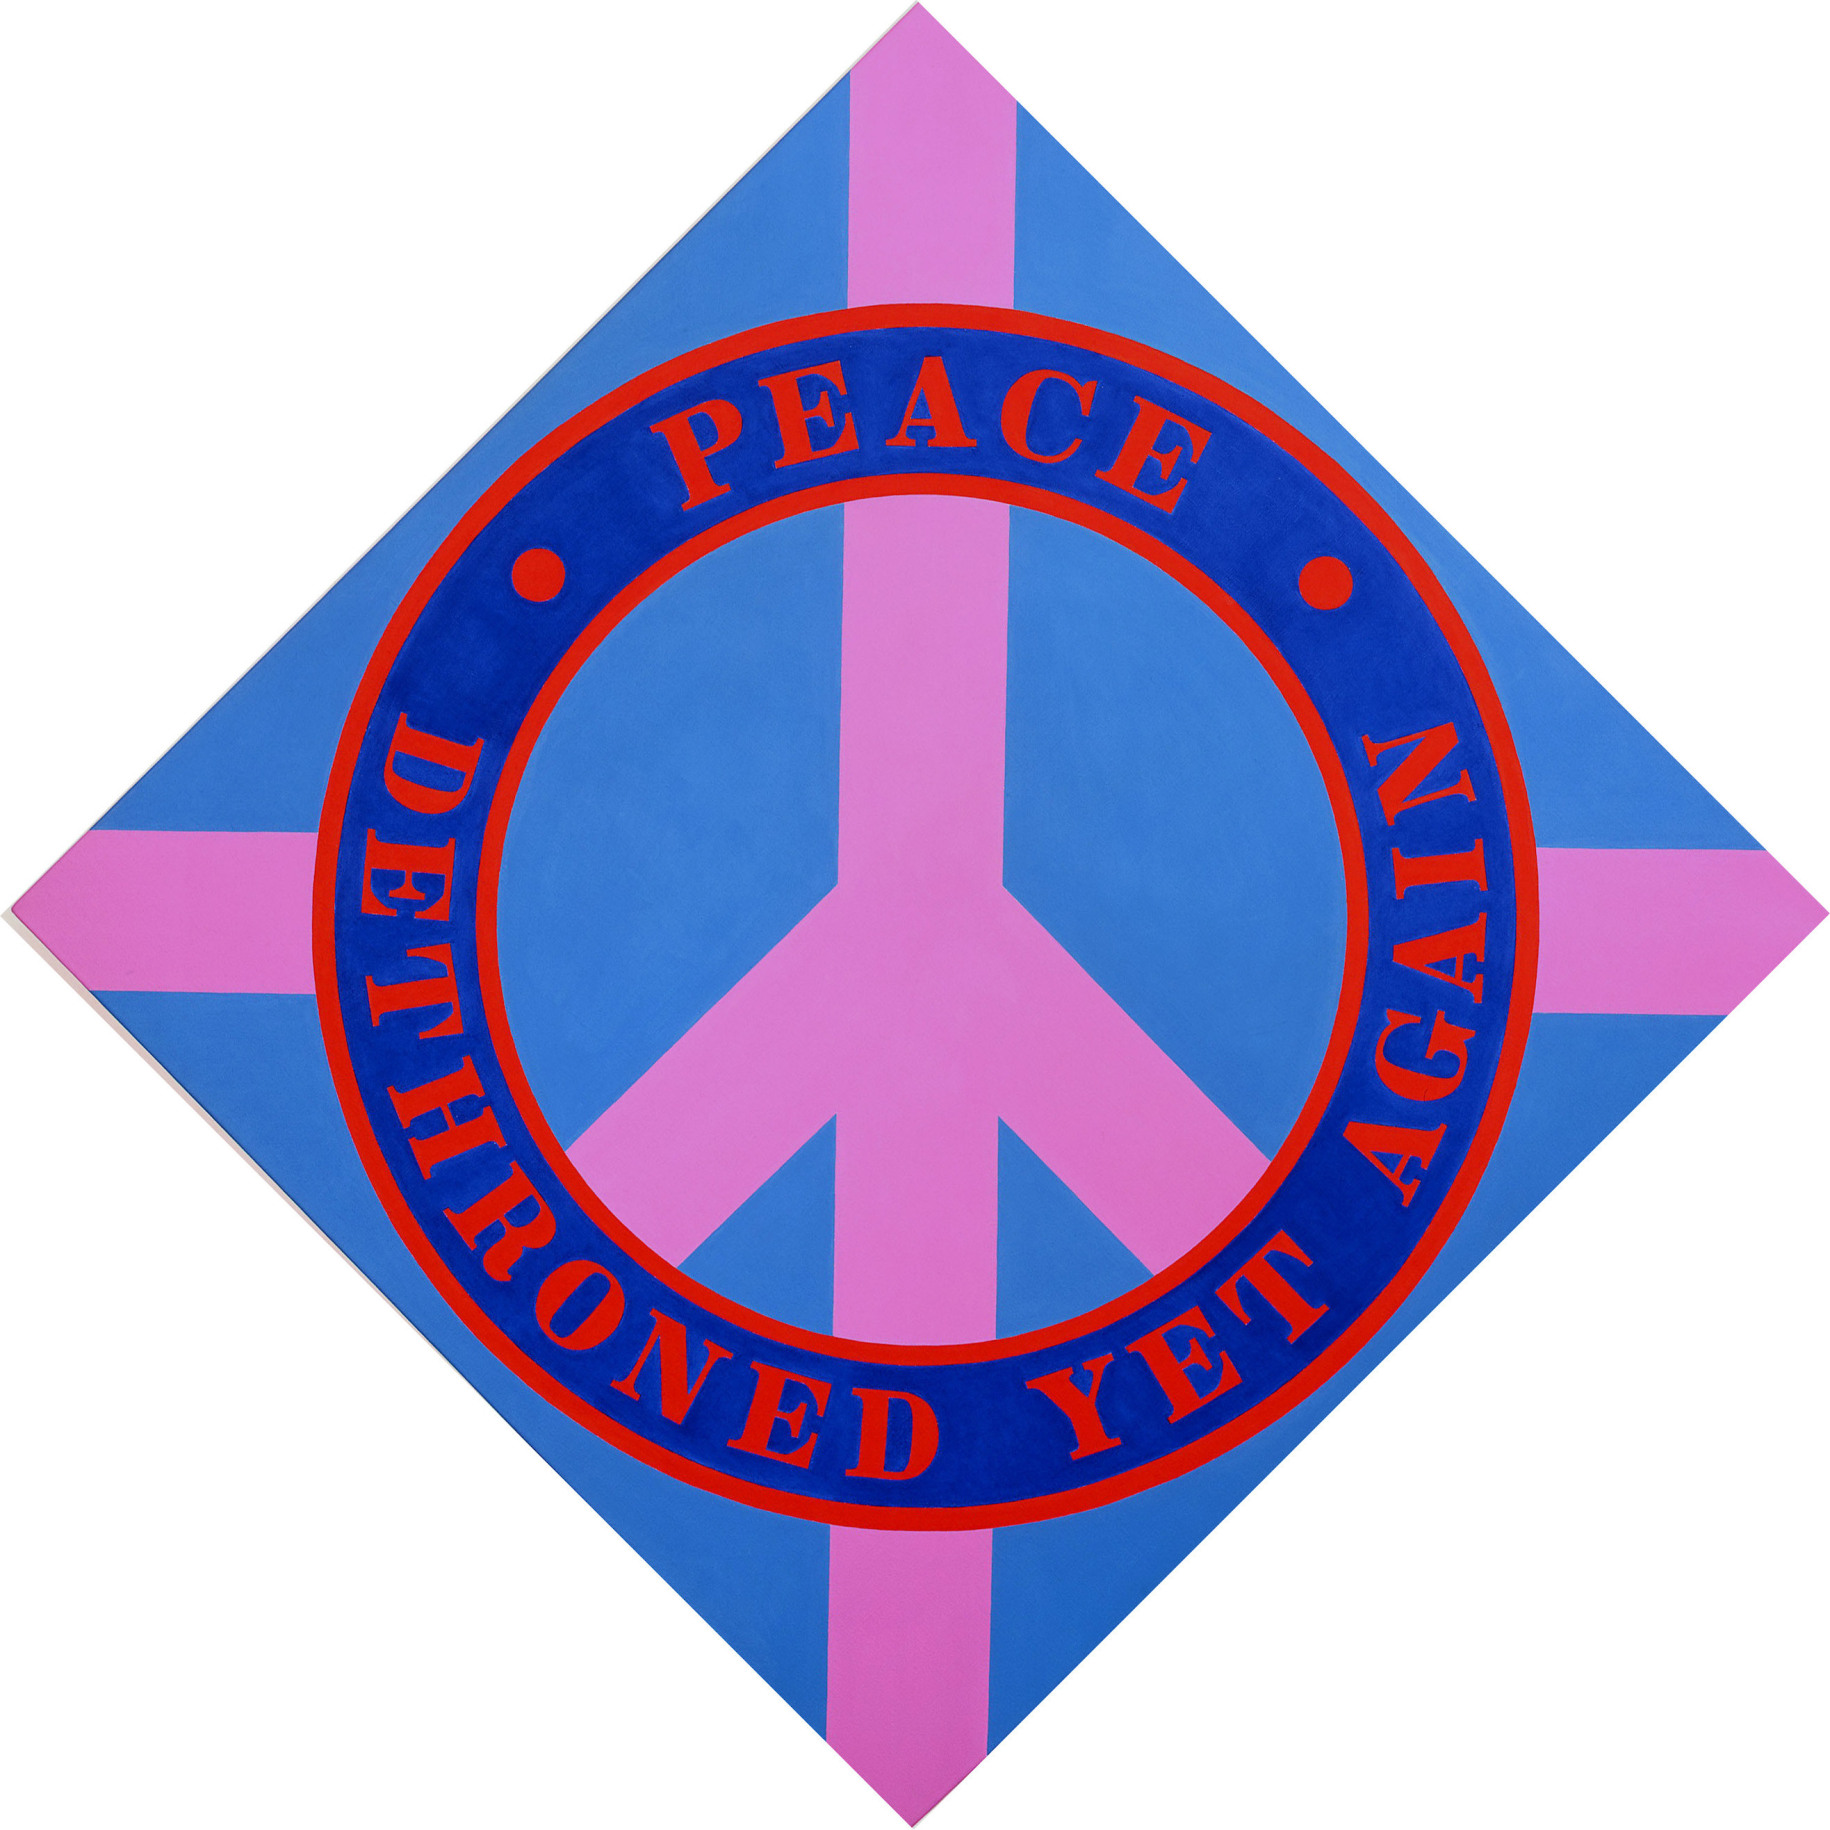 A 50 1/2 by 50 1/2 diamond shaped light blue painting with a lilac peace sign within a circle. The ring around the sign is dark blue with red outlines. In it the work's title, &quot;Peace Dethroned Yet Again,&quot; is painted in red letters. &quot;Peace&quot; appears on the top half, and &quot;Dethroned Yet Again&quot; appears on the bottom half. A small red circle has been painted on each side of the word &quot;Peace.&quot; Lilac rectangular bands of paint go from the outer edge of the circle to each corner of the triangle.